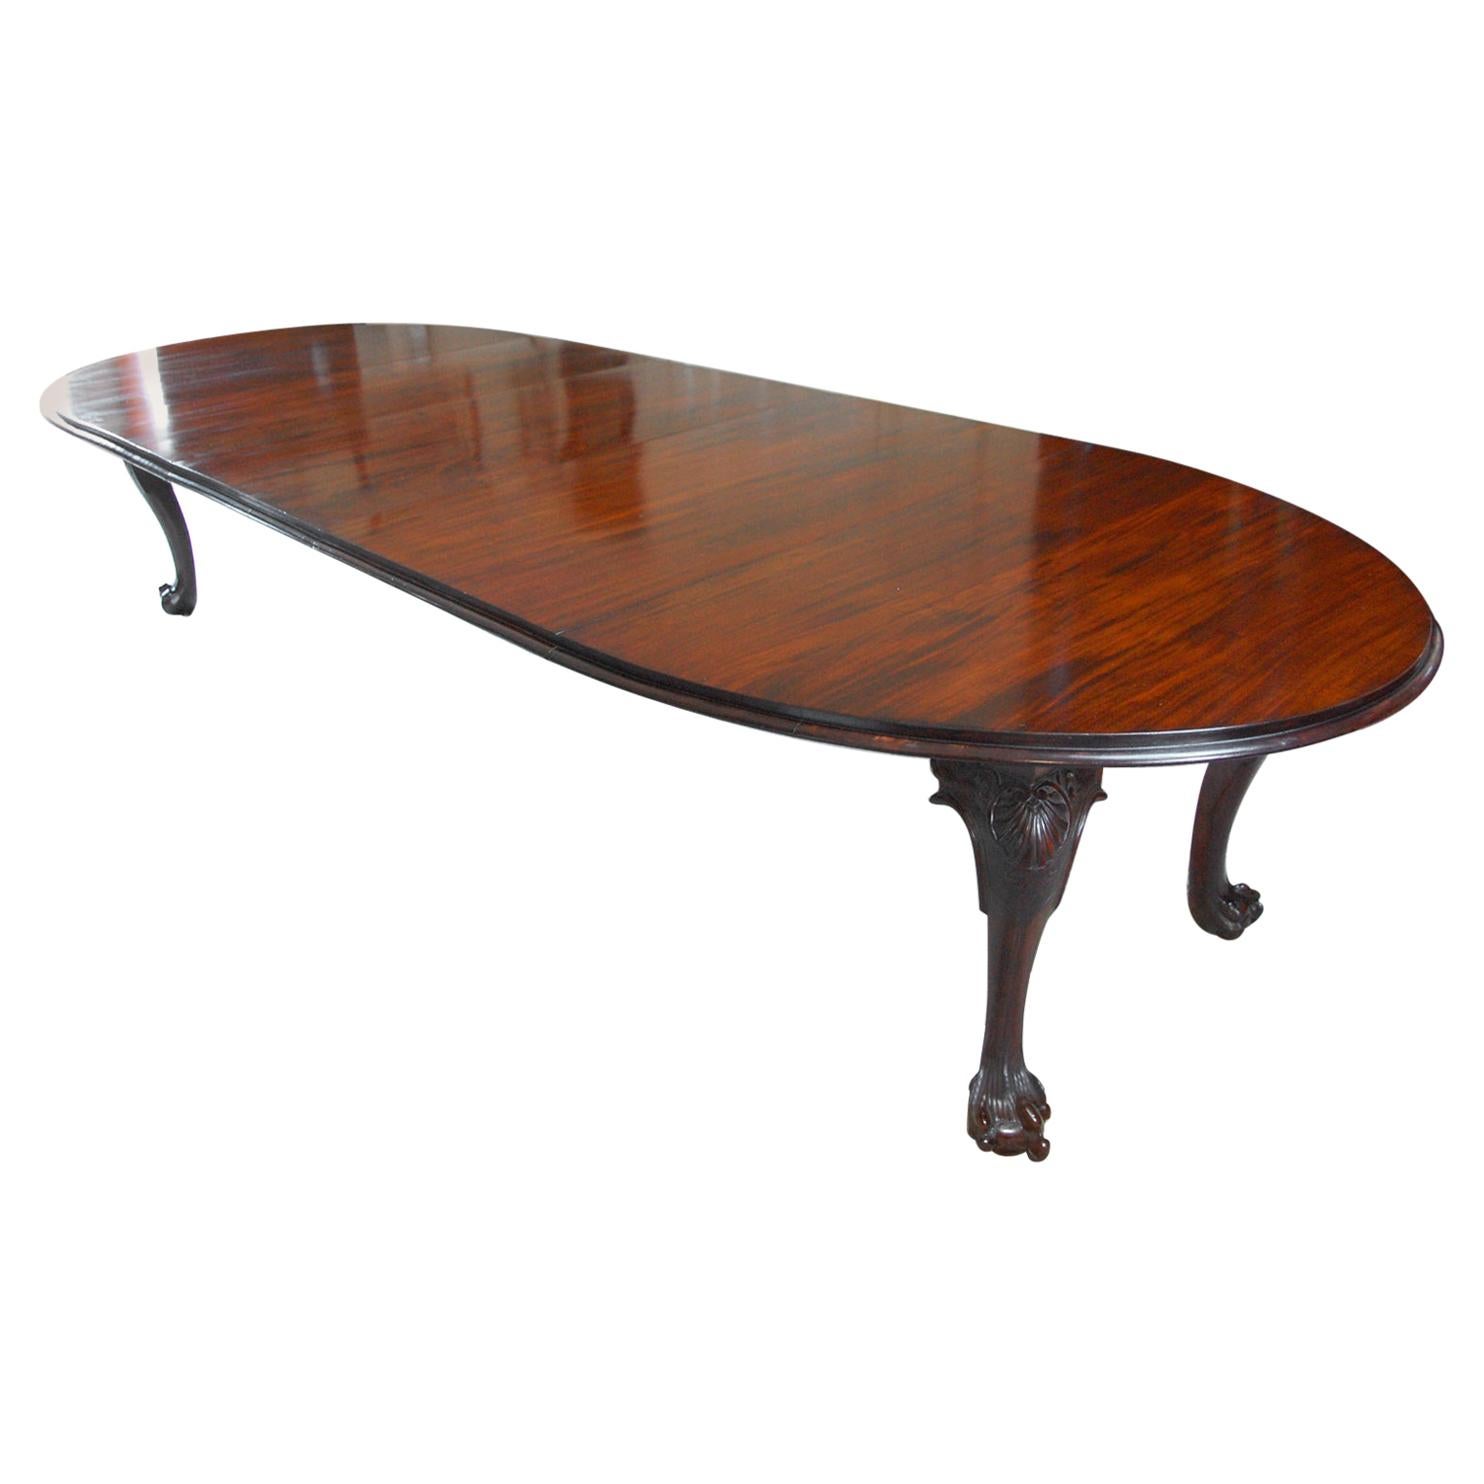 English Late 19th Century Chippendale Style Mahogany Banquet Table with Leaves